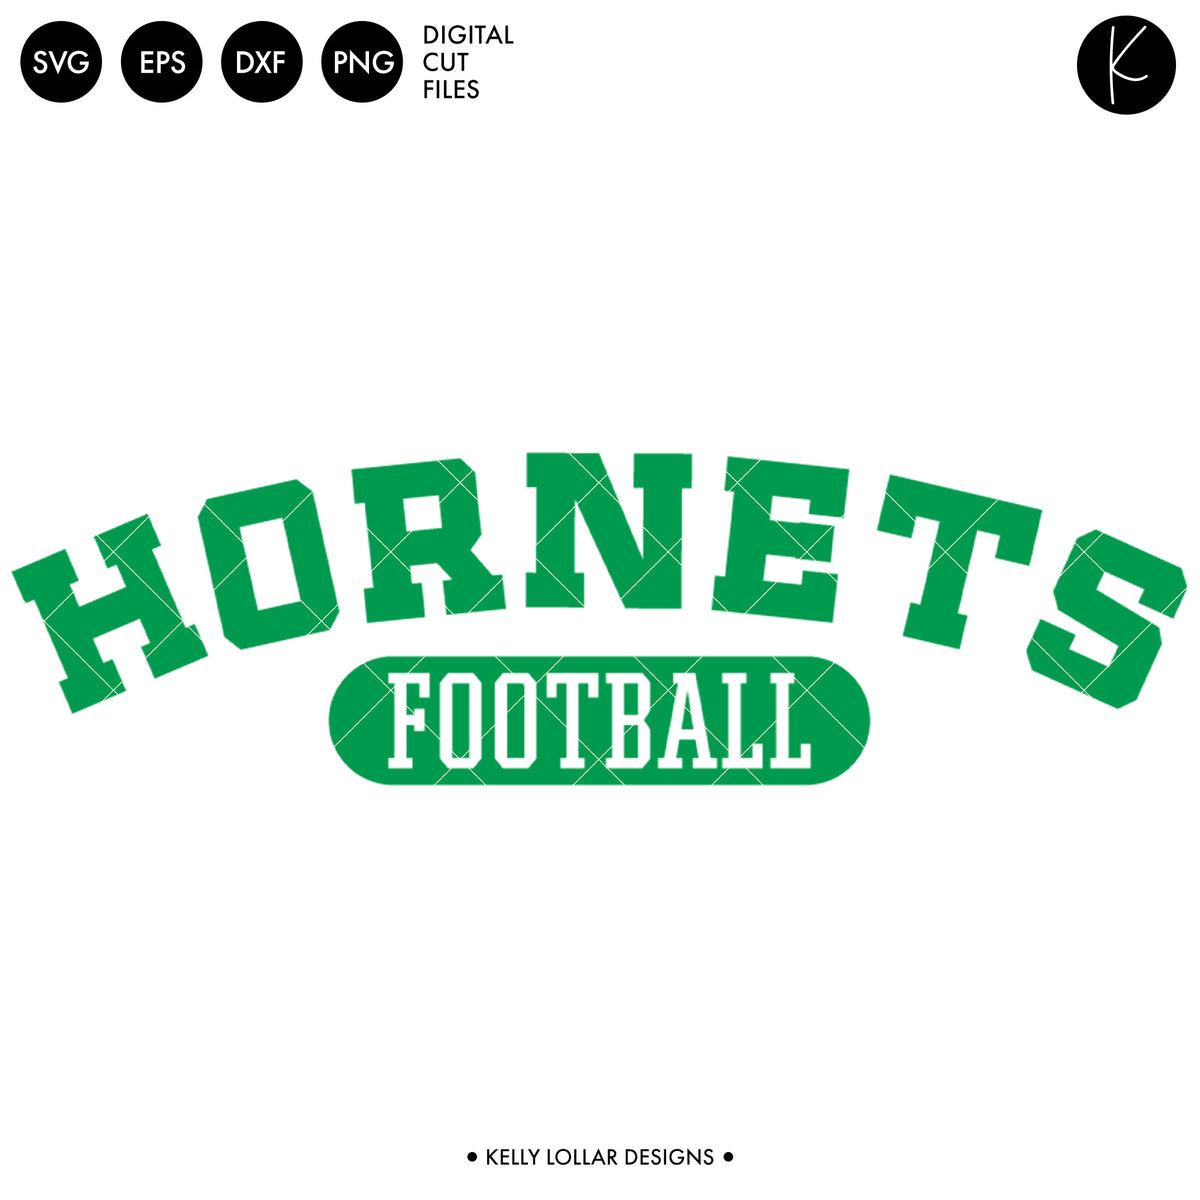 Hornets Soccer and Football Bundle | SVG DXF EPS PNG Cut Files